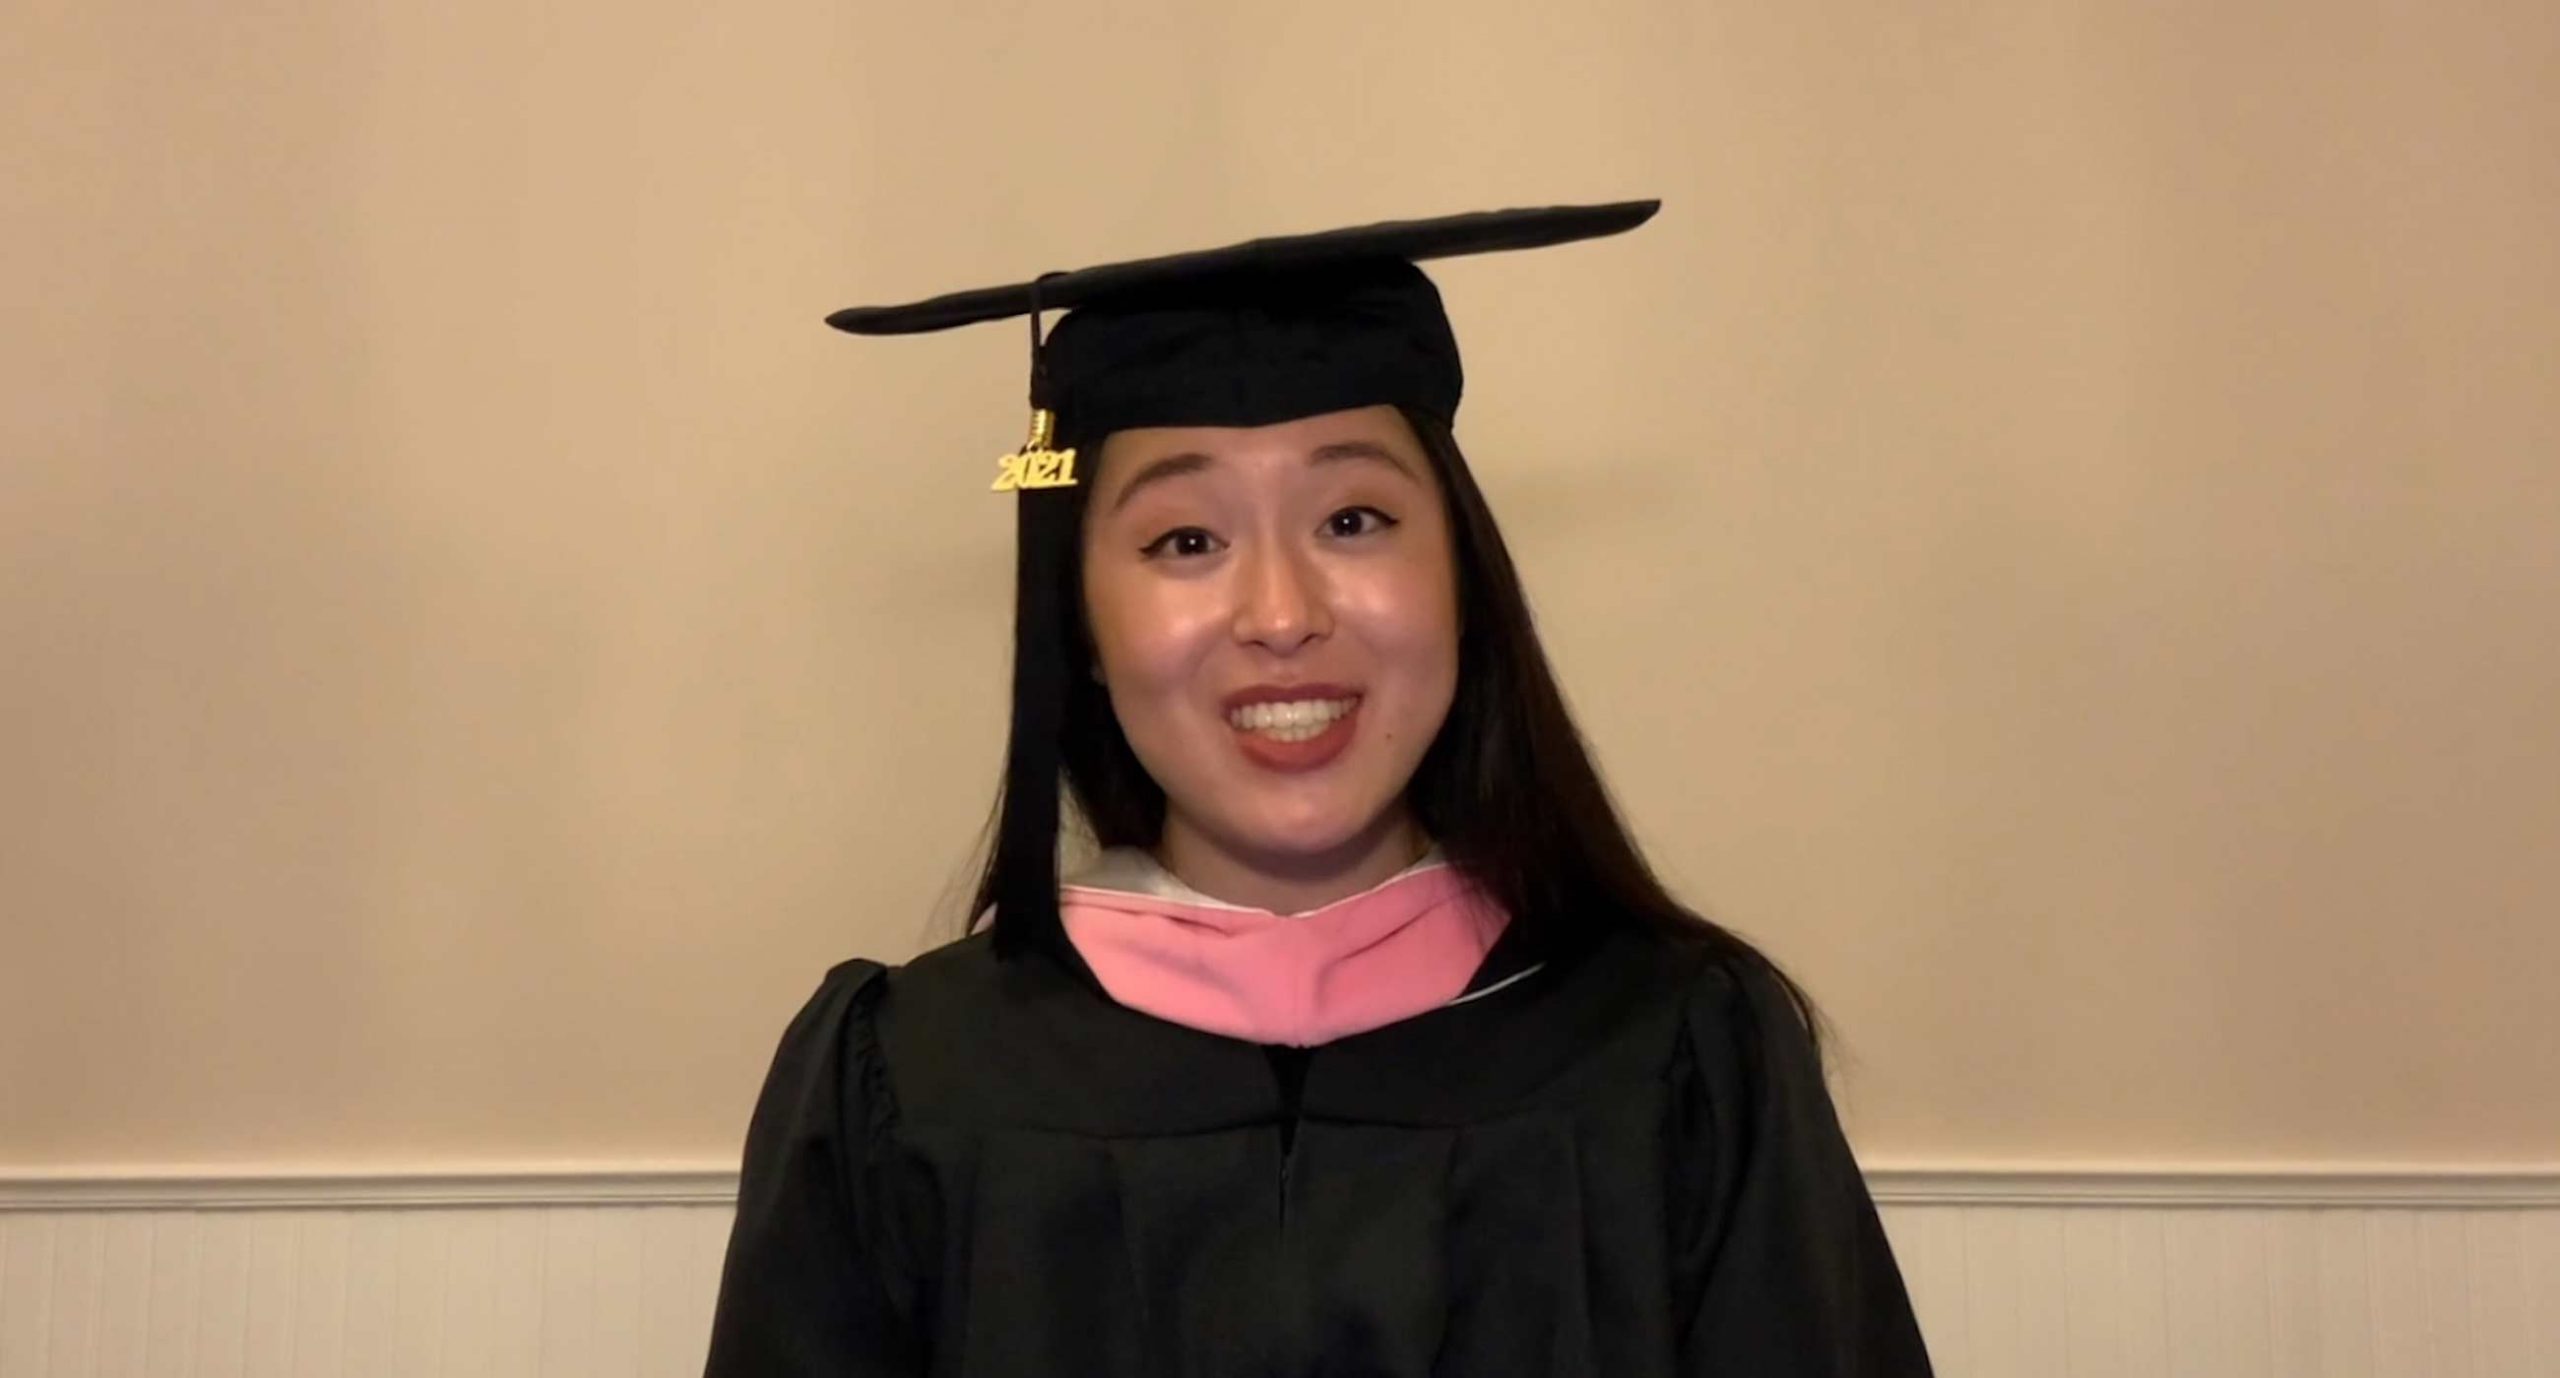 Alyssa Katahara wearing cap and gown with pink stole smiling